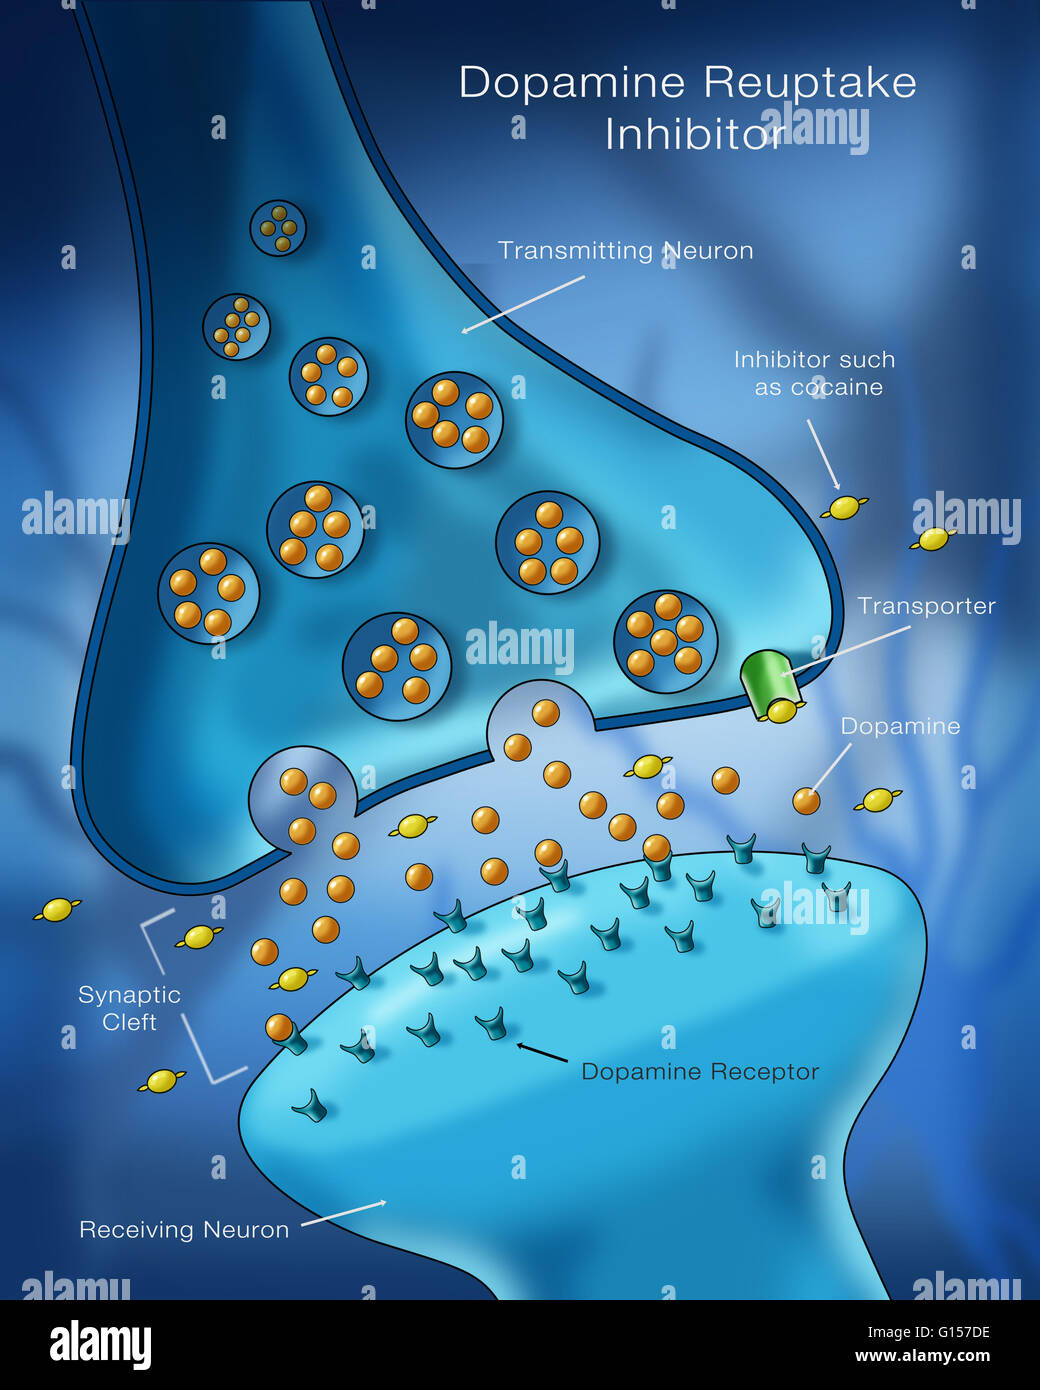 Labeled illustration showing the effect of a dopamine reuptake inhibitor (DRI), a type of drug used to treat conditions like ADHD and depression, on the action of a dopamine transporter. Stock Photo